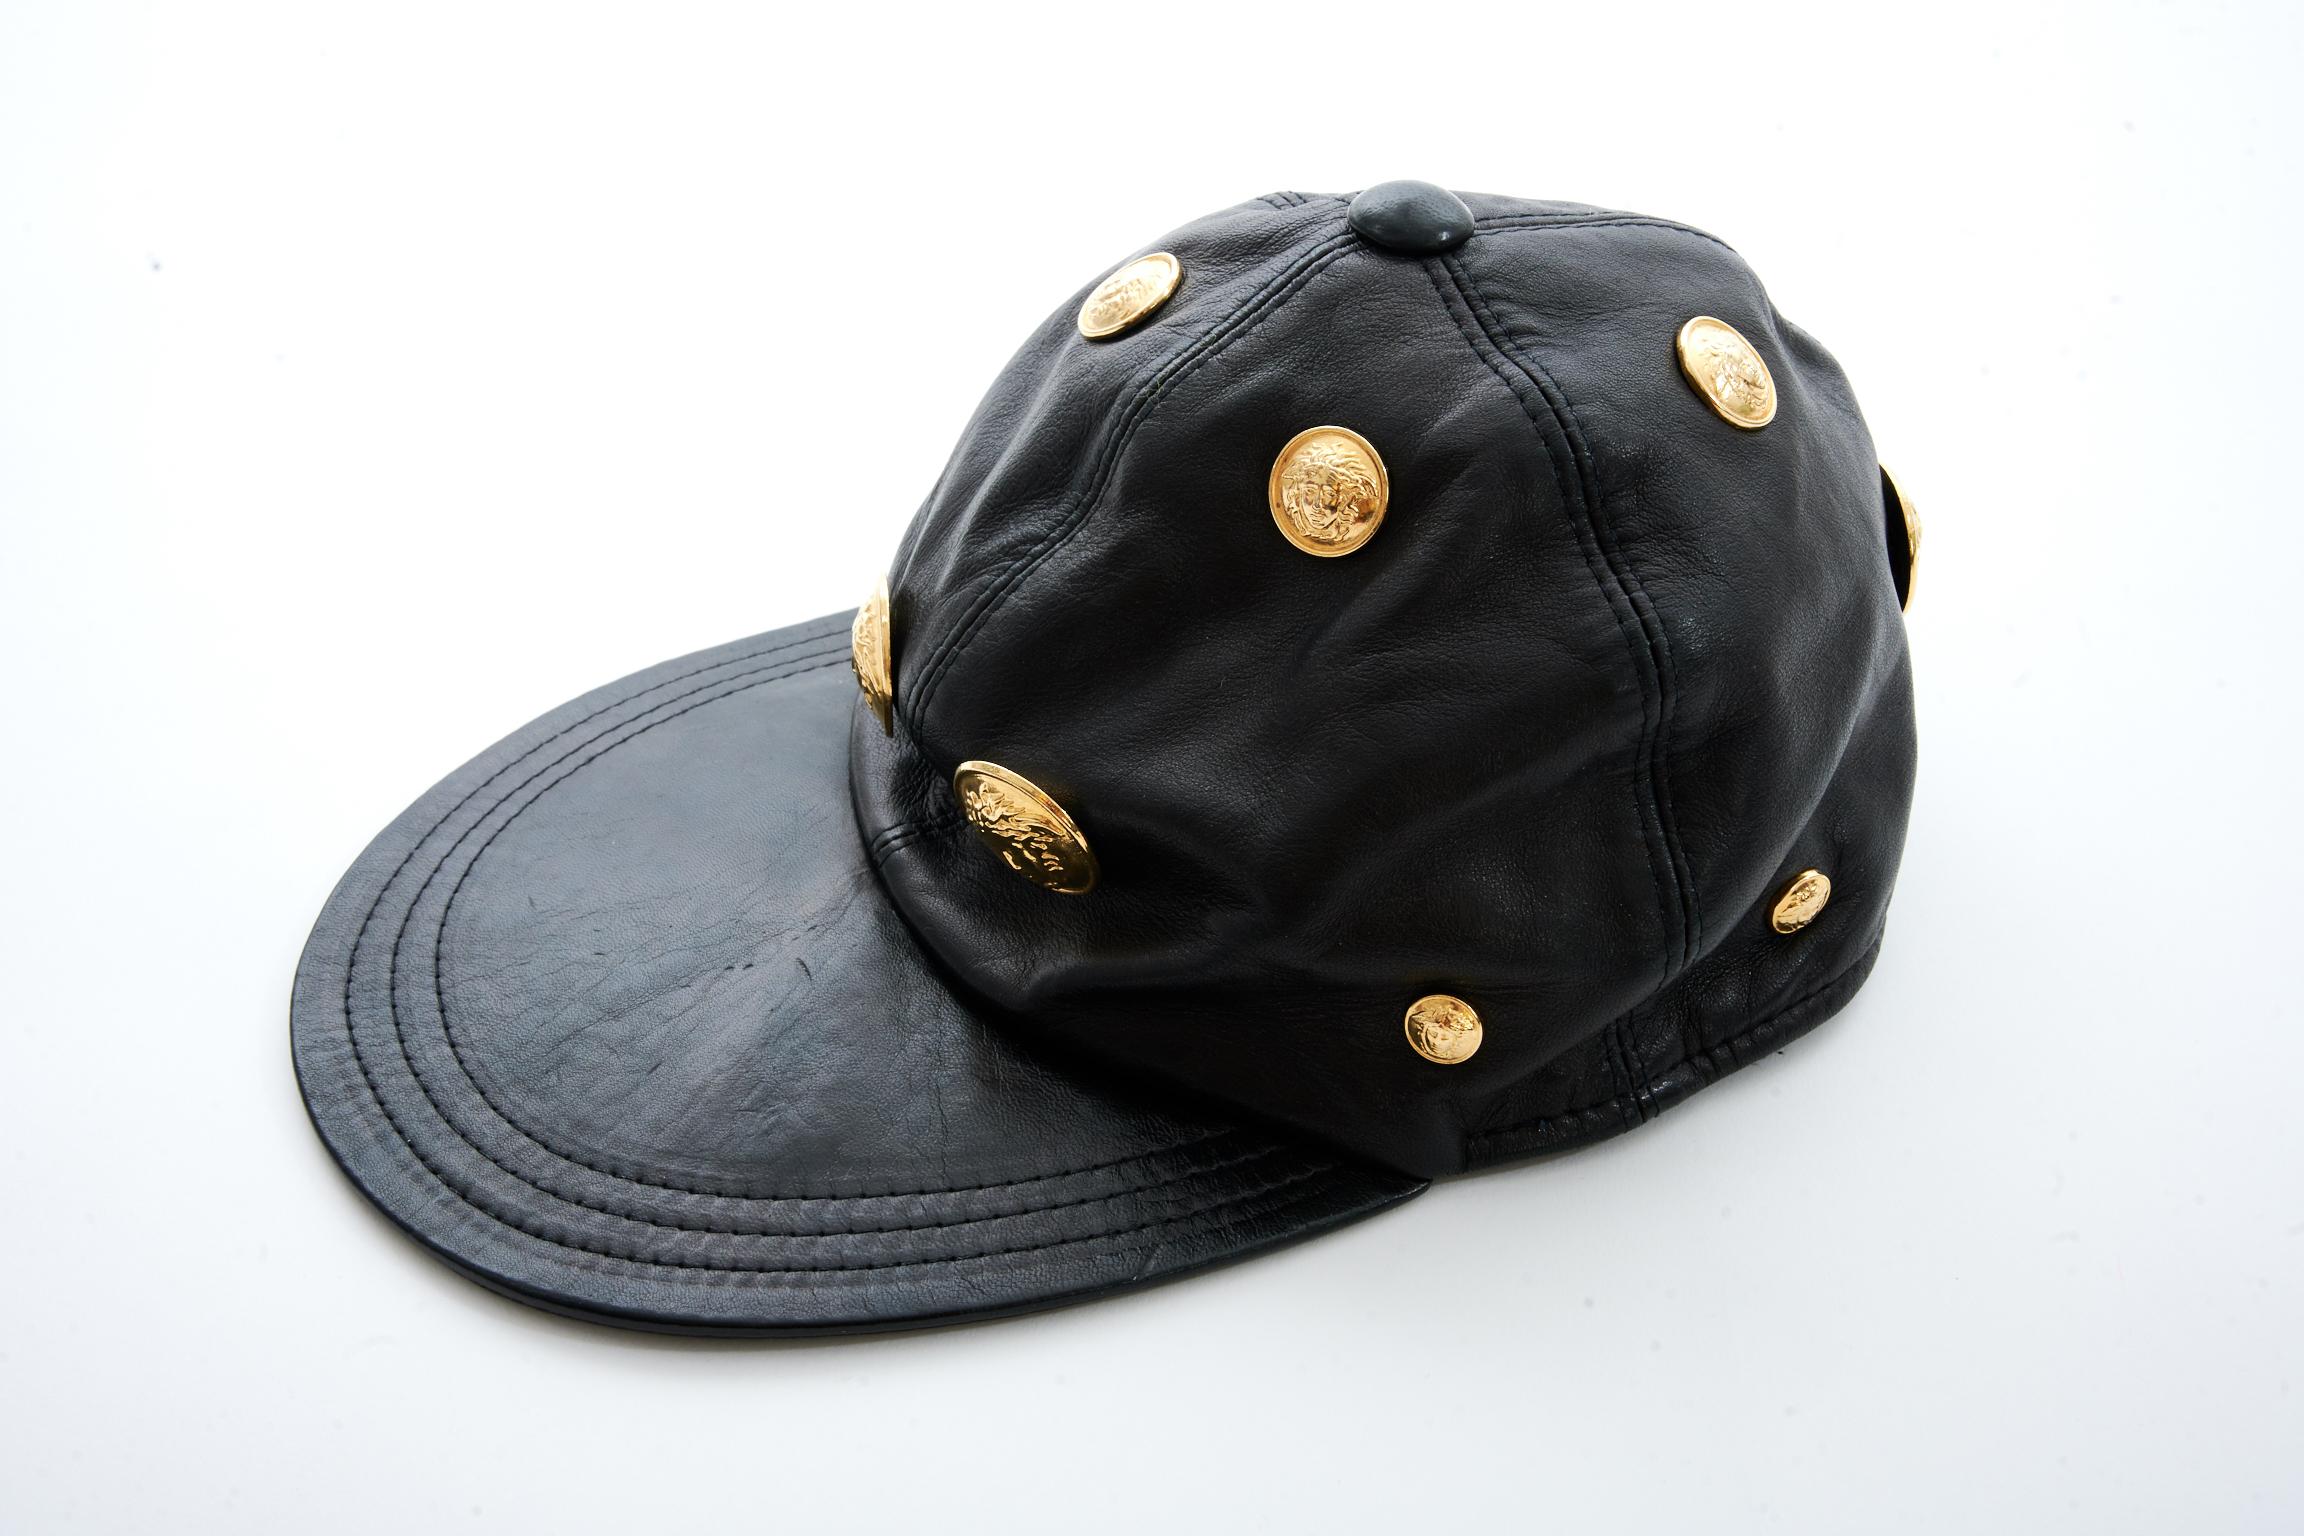 When we look back to the '90s, we instantly think of Versace's iconic esthetics ! This is a perfect example : Decorated all over with the recognizable and iconic gold metal Medusa heads of various sizes, this early 90's baseball cap is made from